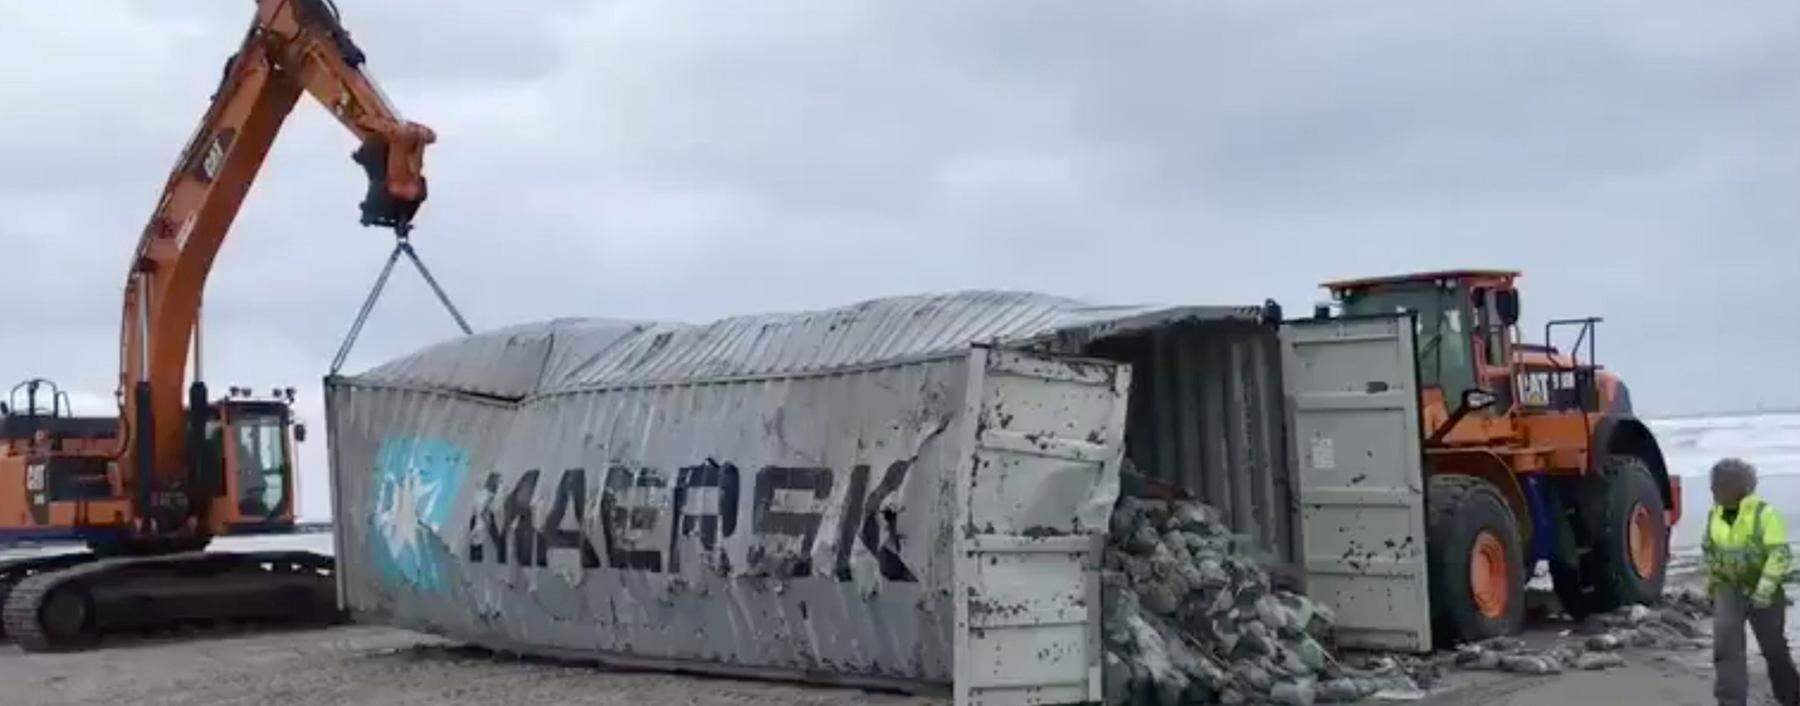 Heavy machinery lift cargo container after it washed up on beach in Vlieland